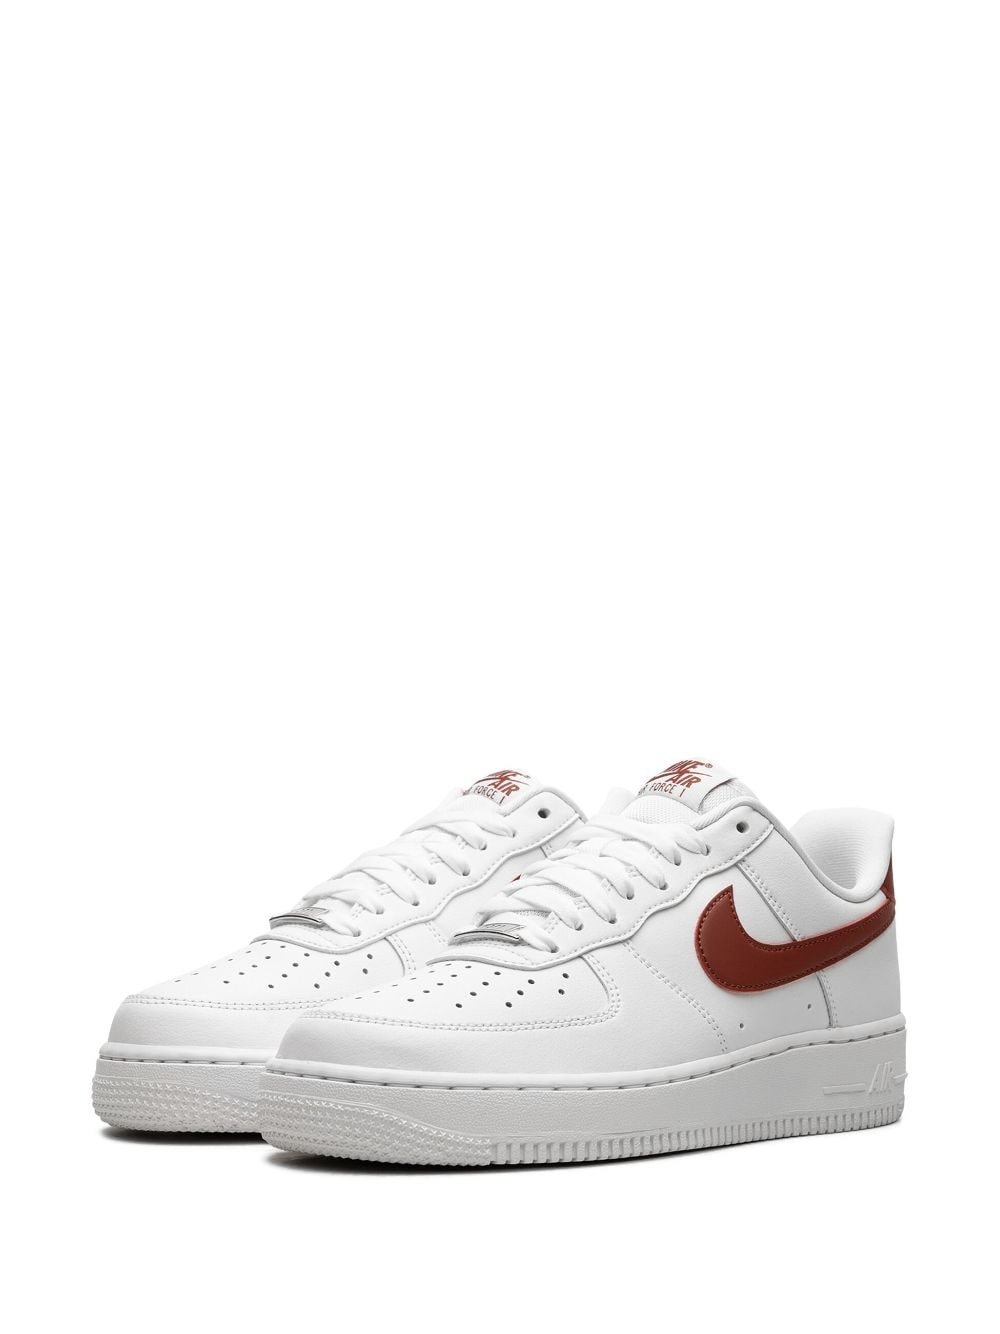 Air Force 1 '07 "White/Rugged Orange" sneakers - 5